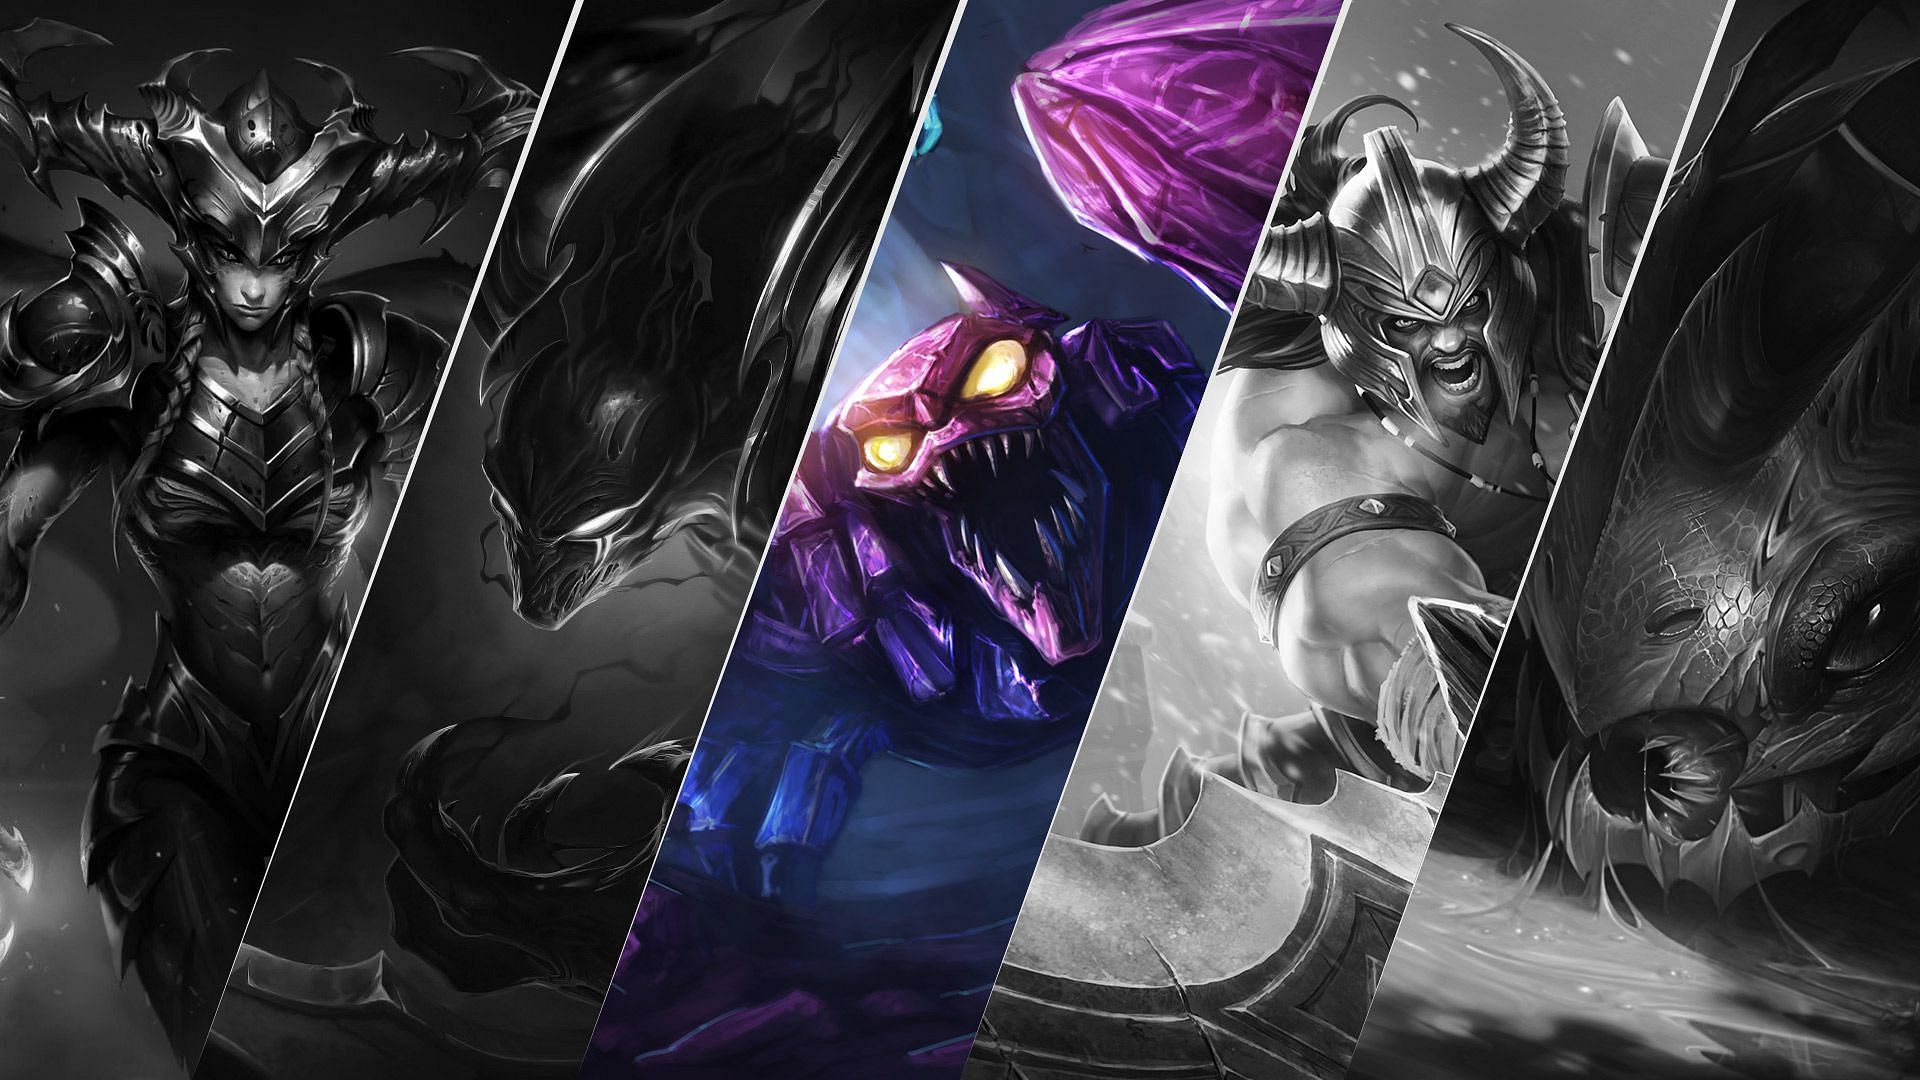 Skarner VGU update might provide a new life to this champion (Image via League of Legends)